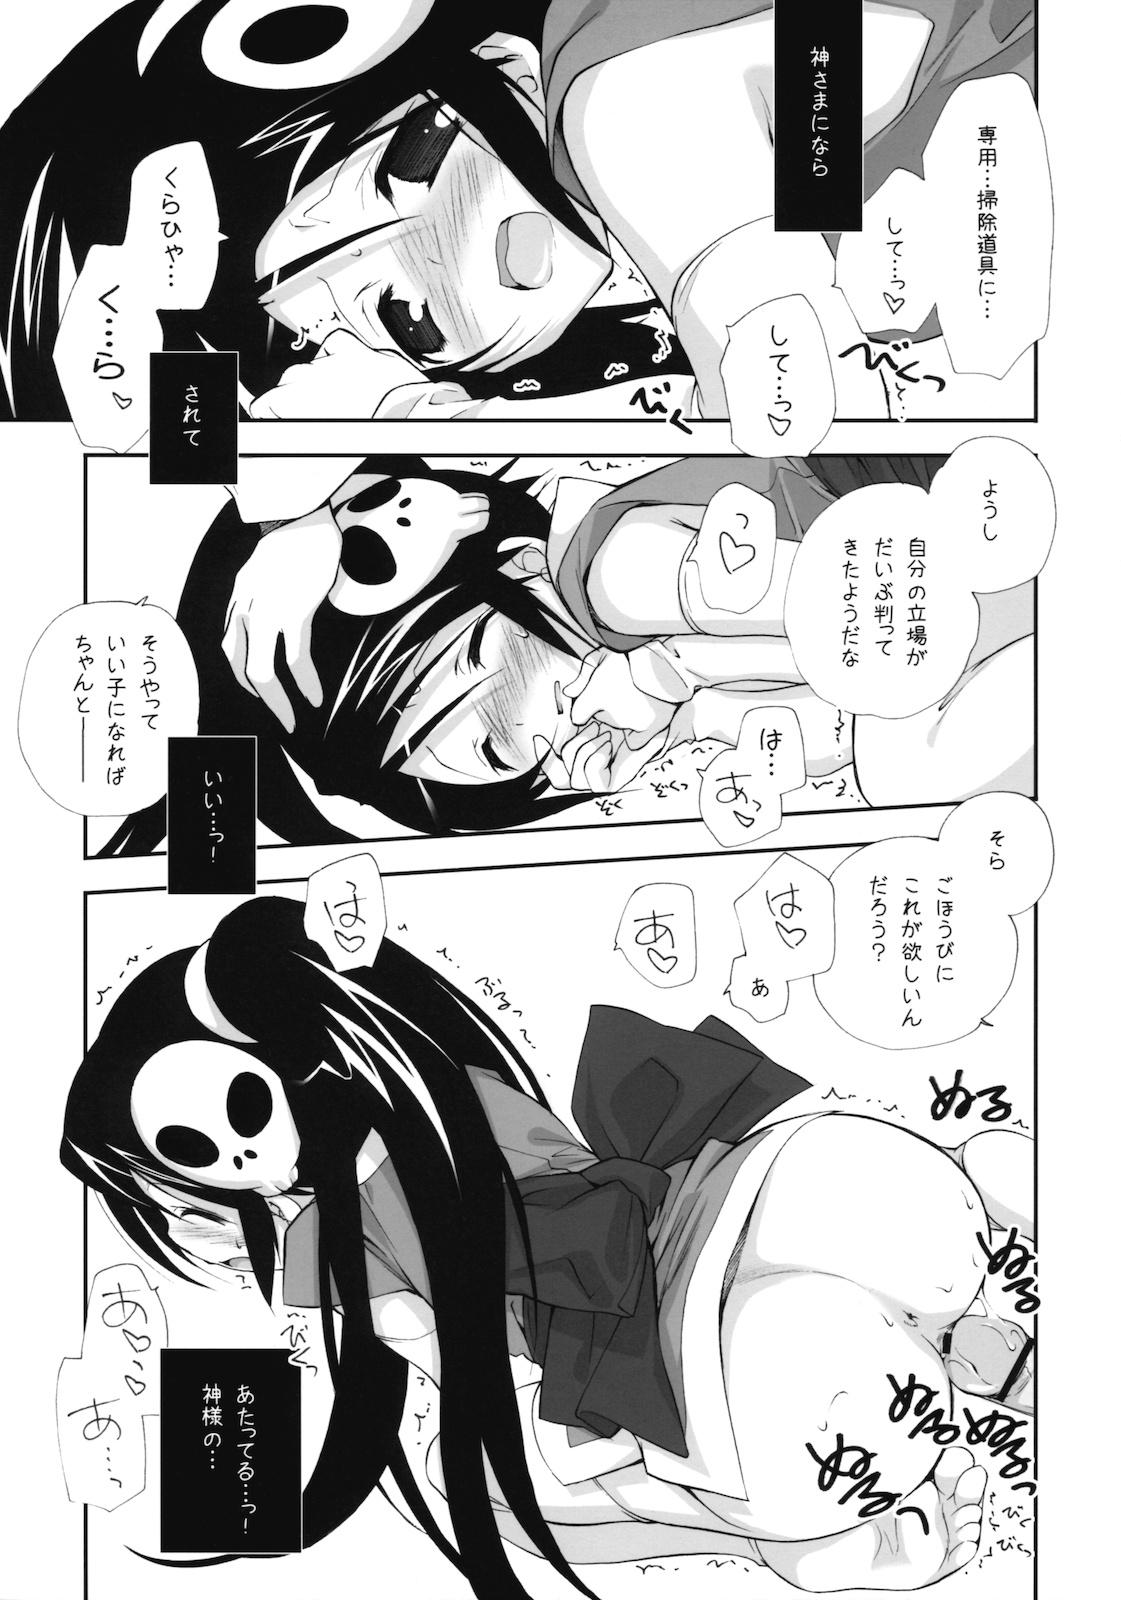 Khmer Citron Ribbon 27 - The world god only knows Hardcore Sex - Page 12